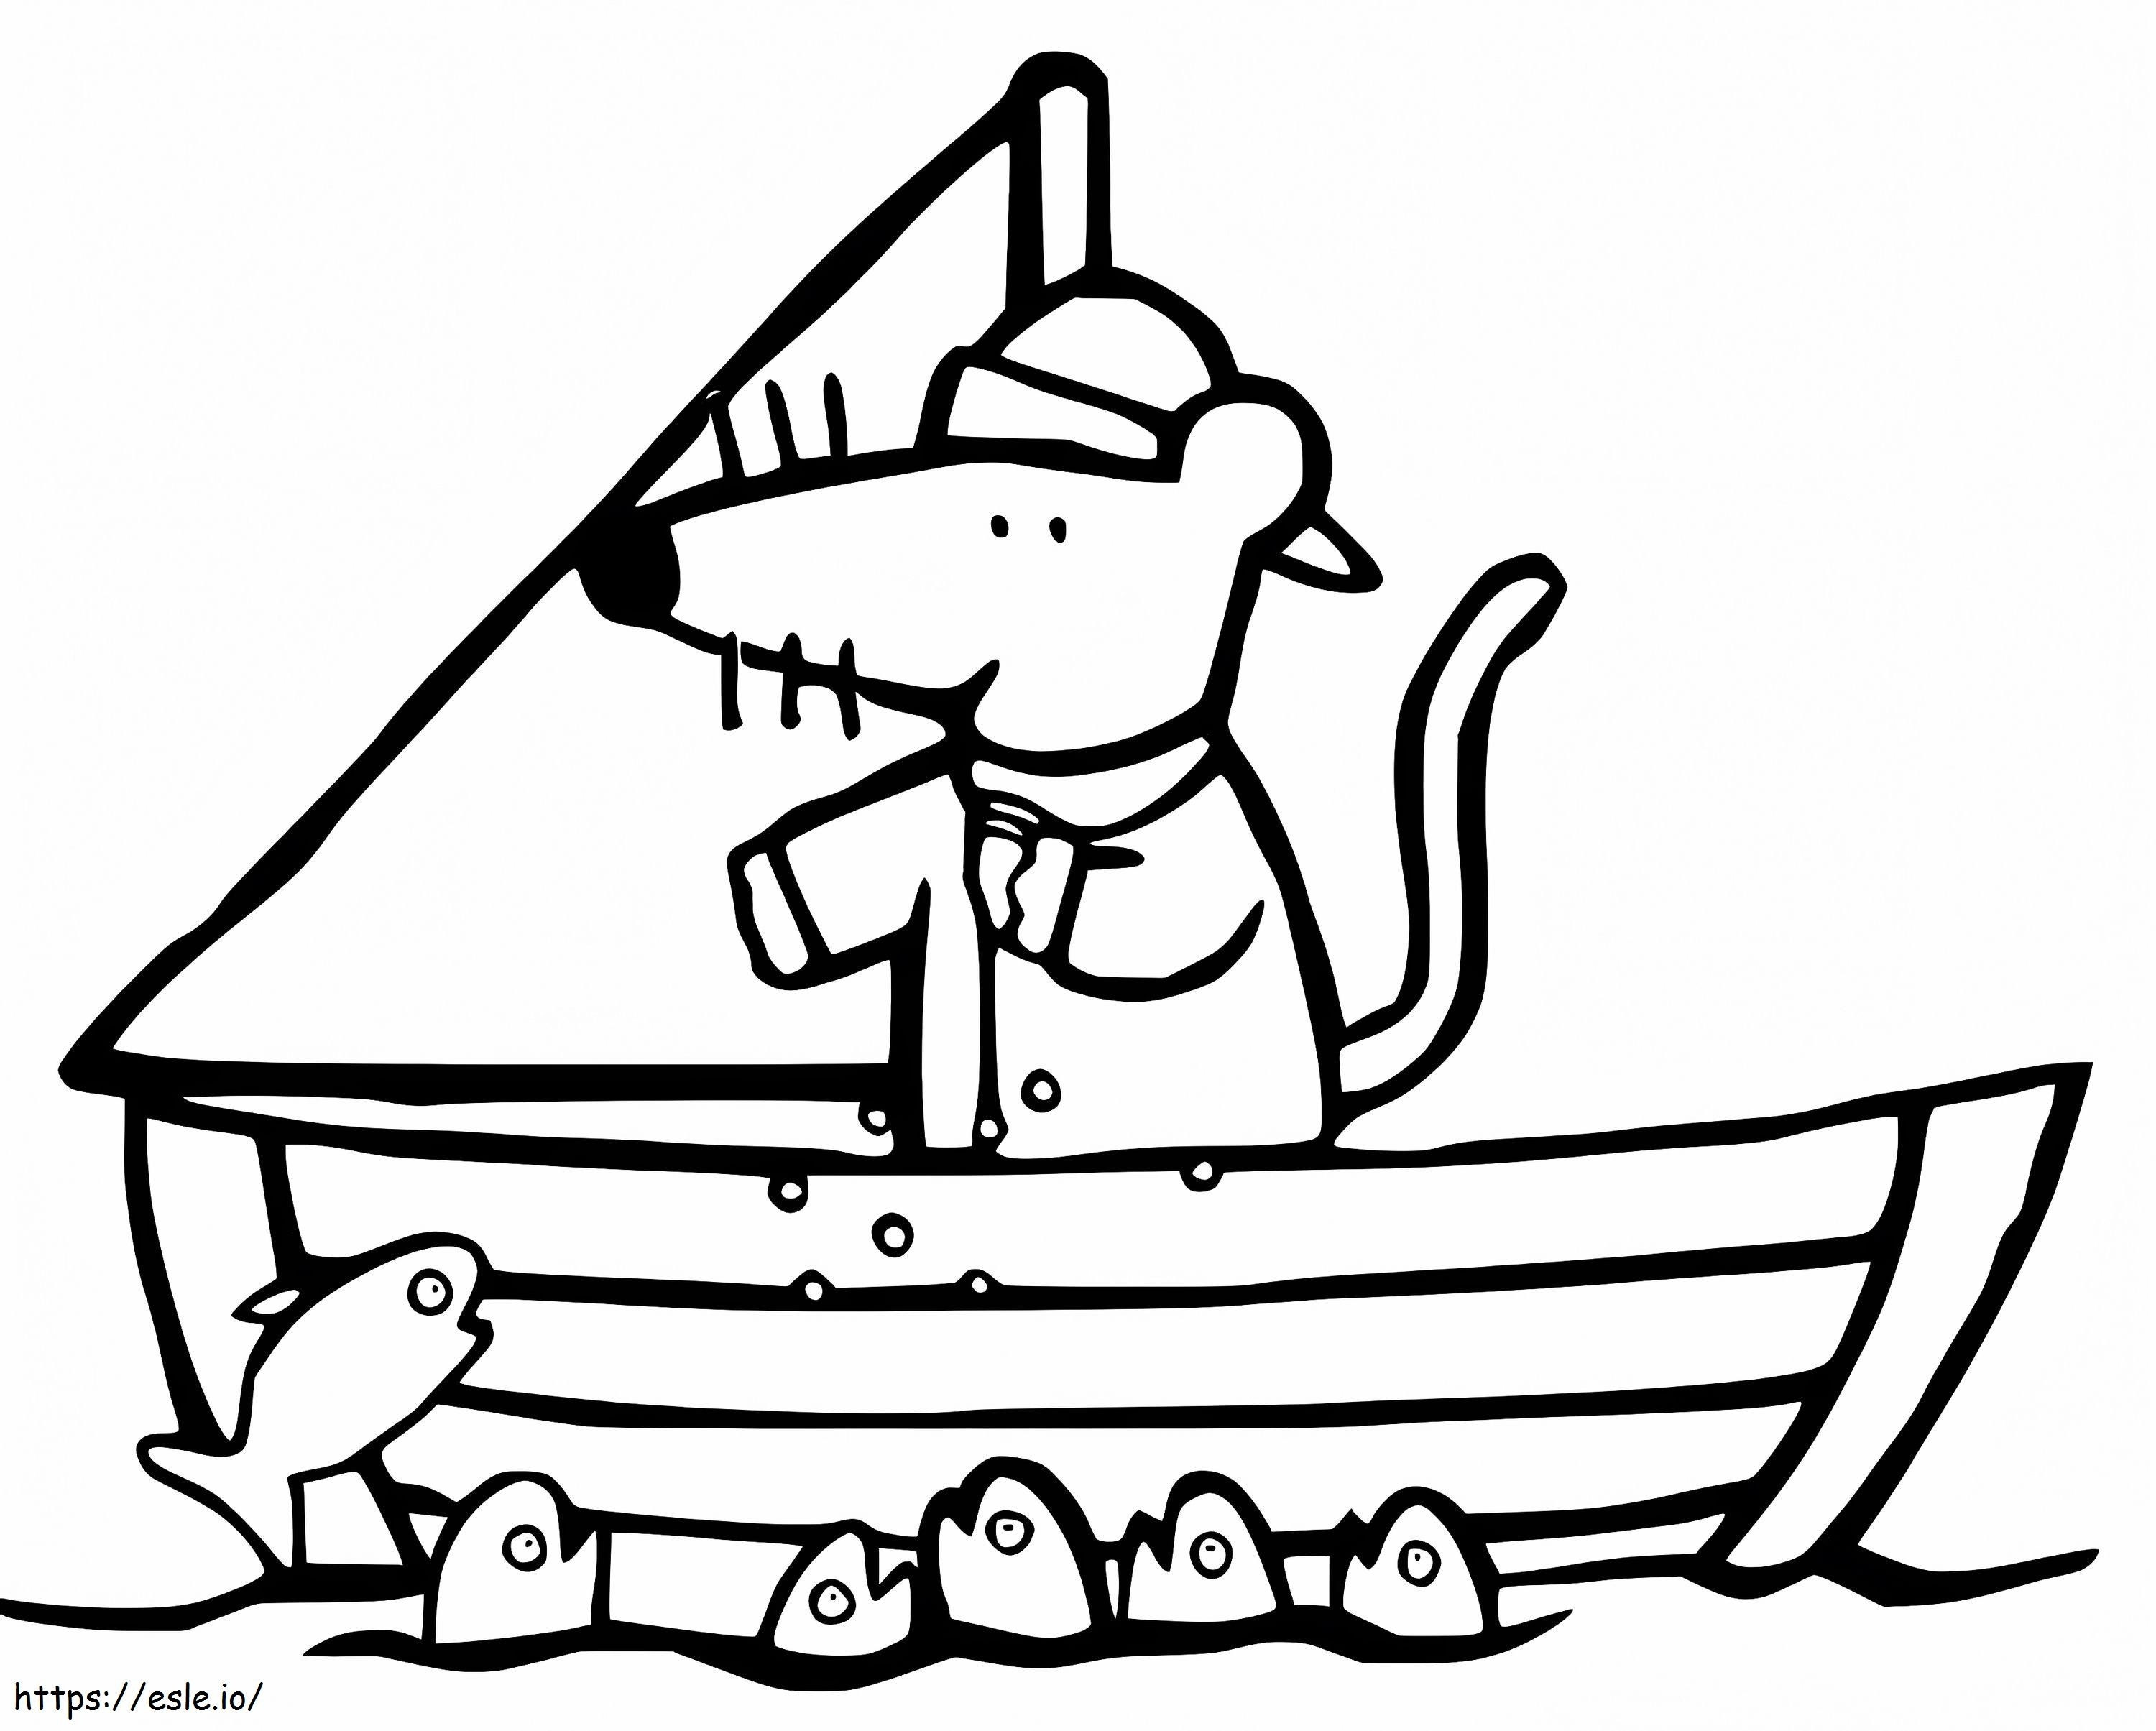 Maisy And Fishes coloring page